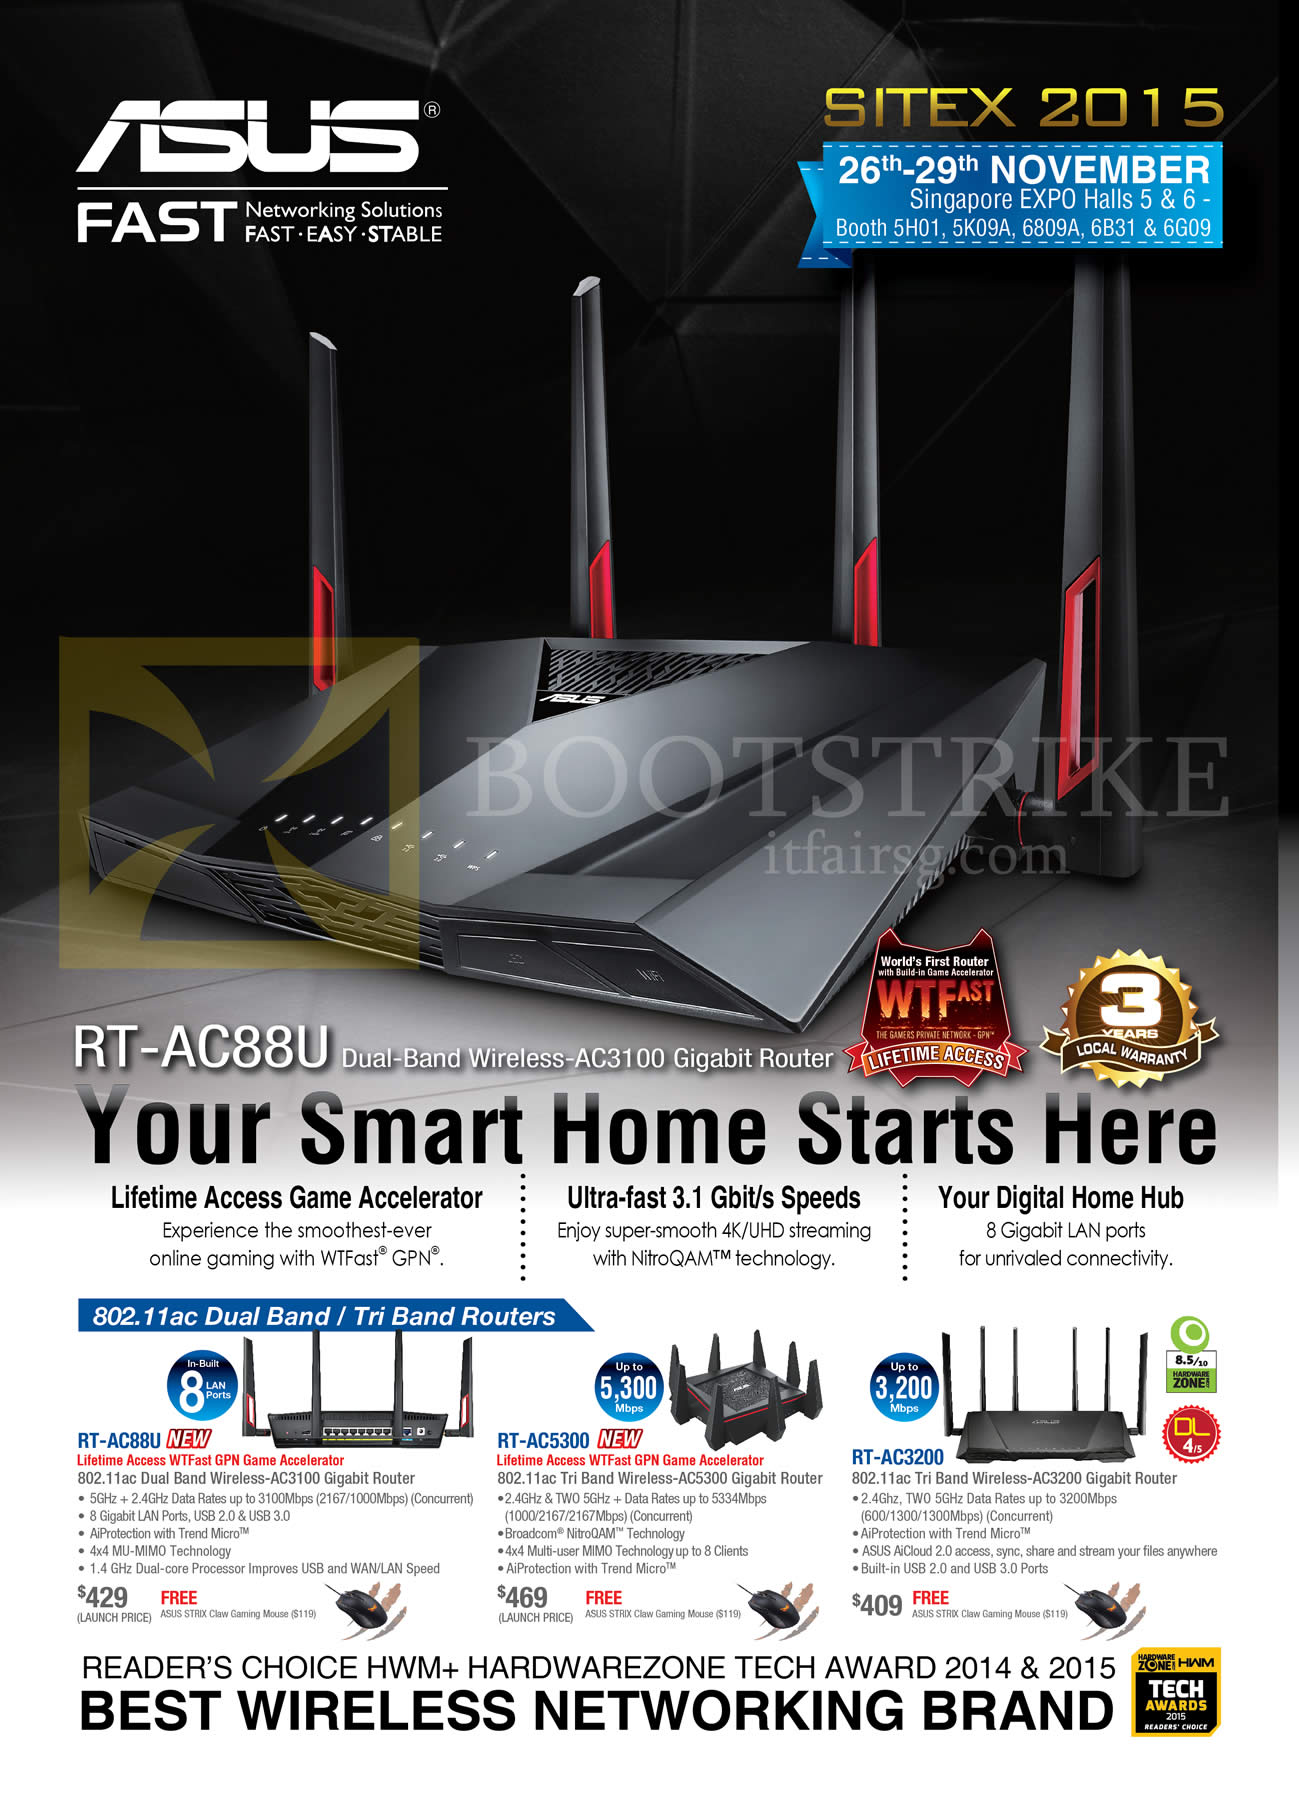 SITEX 2015 price list image brochure of ASUS Networking Router RT-AC88U, RT-AC5300, RT-AC3200